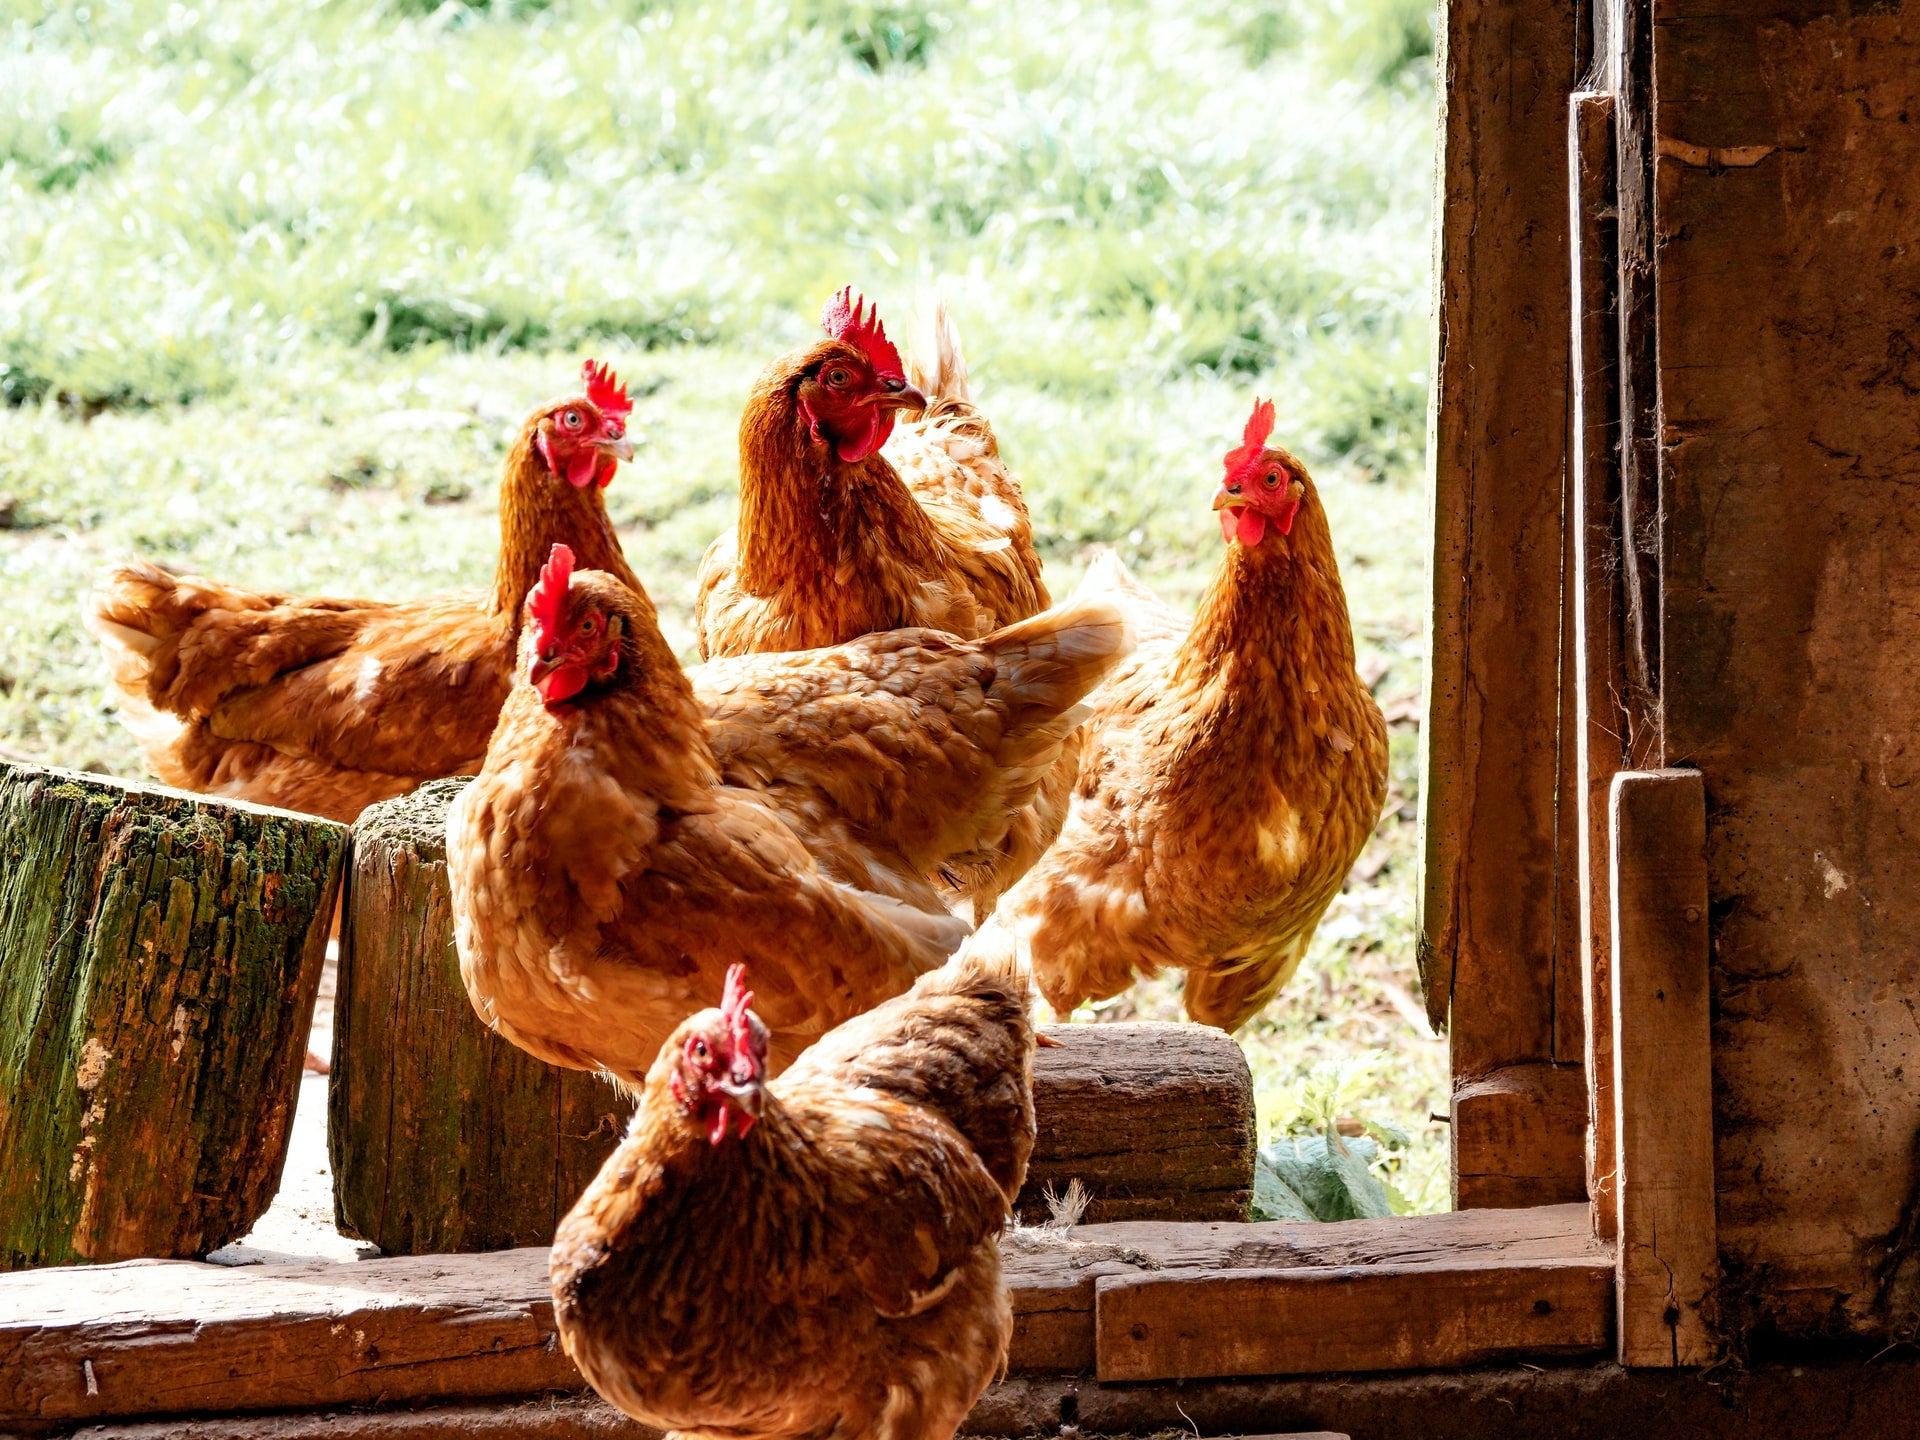 Why free-range eggs are healthier than caged.